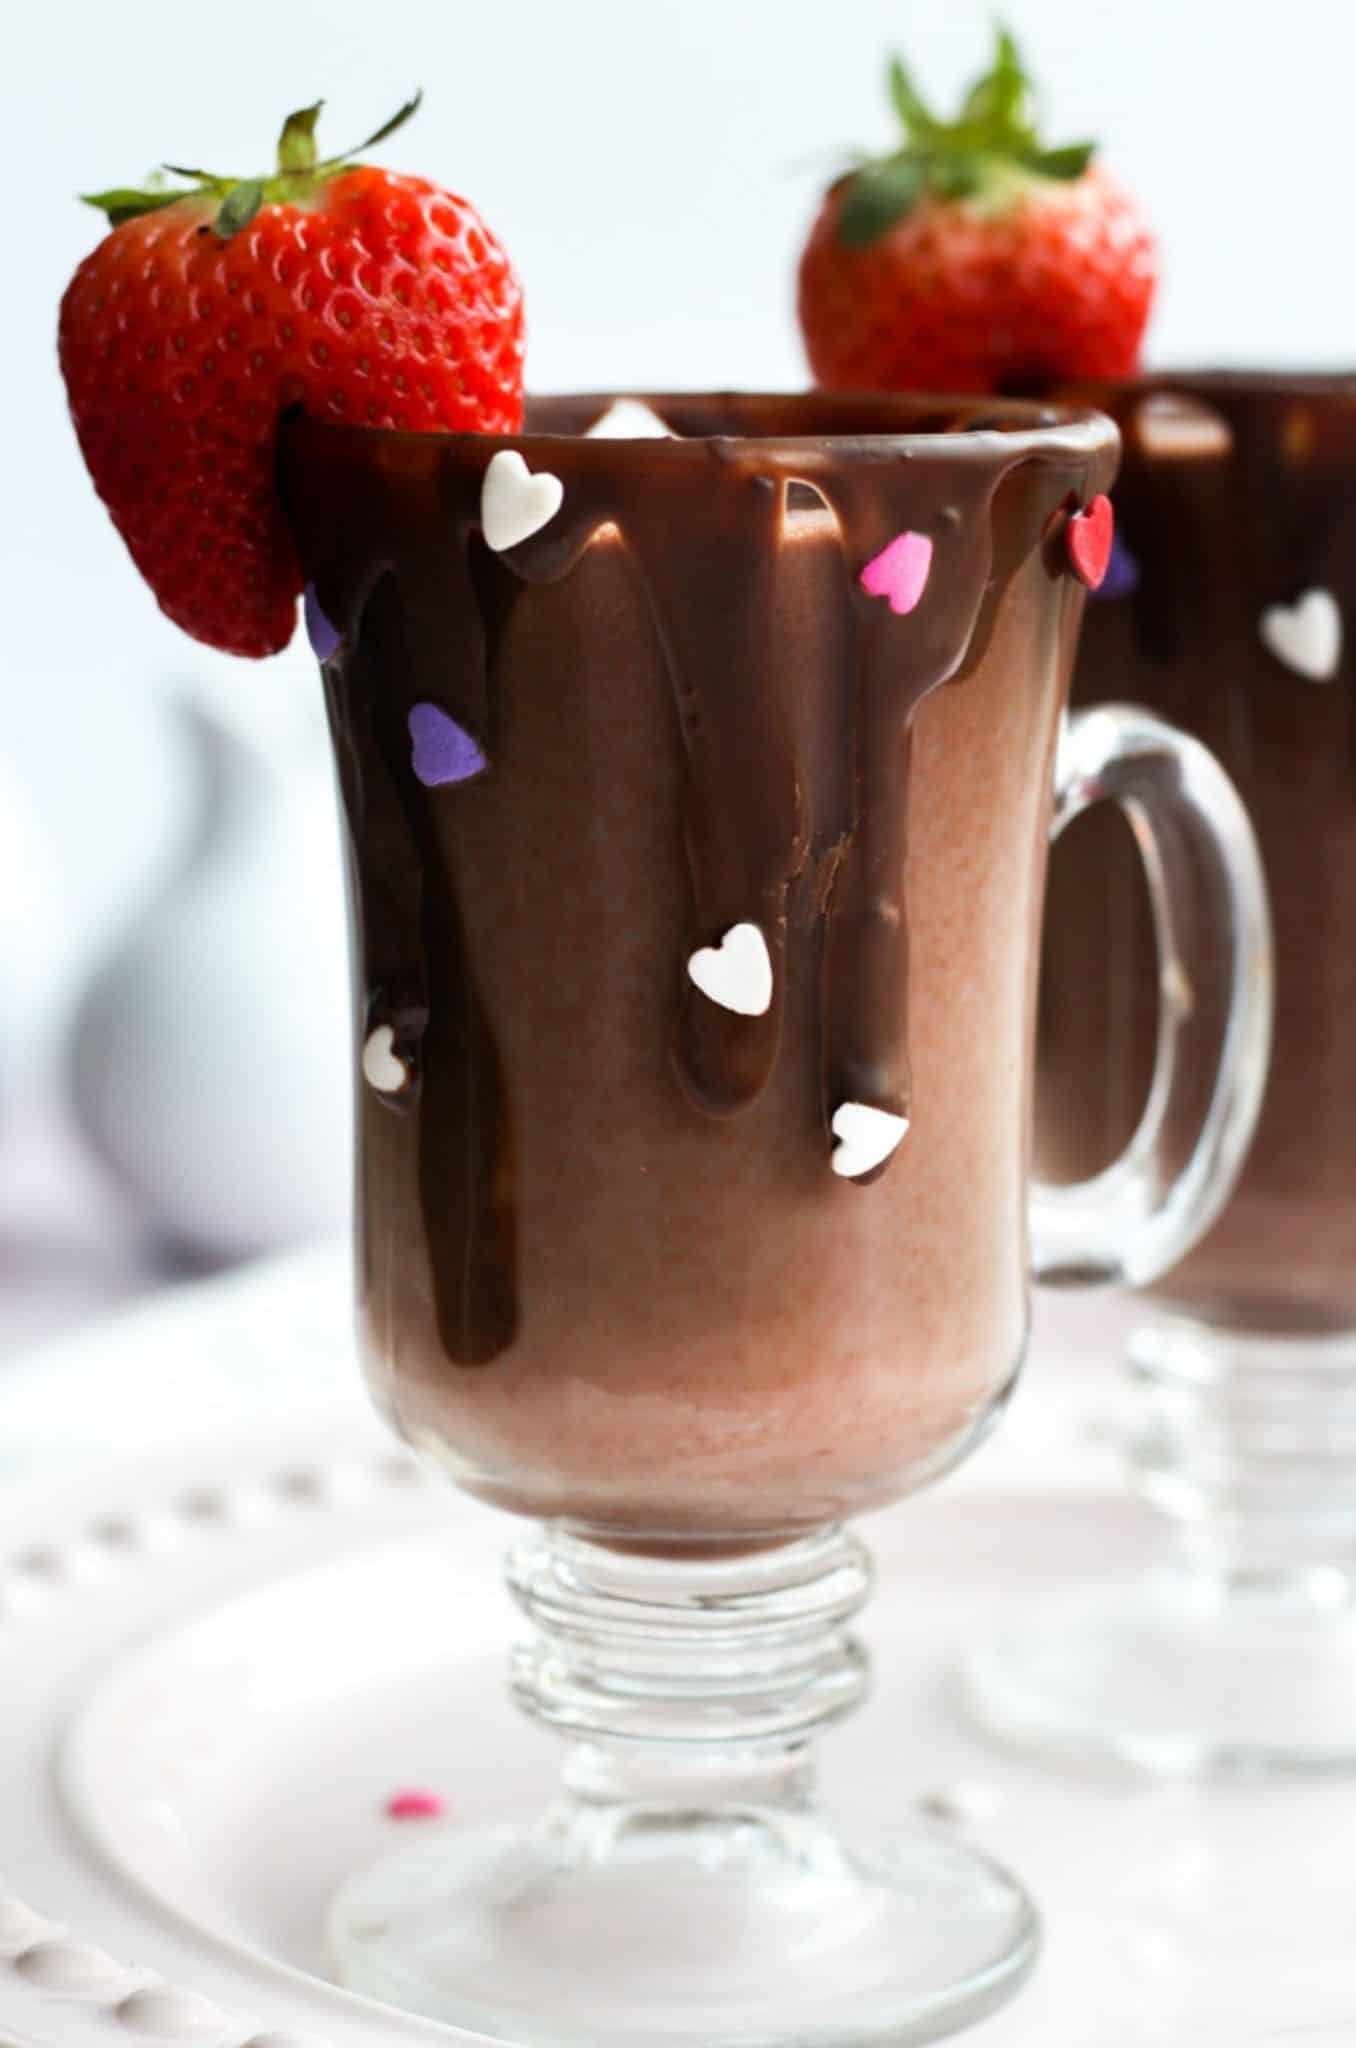 strawberry hot chocolate in a clear mug with a dripped chocolate rim and heart sprinkles. The glass is finished with a cut strawberry